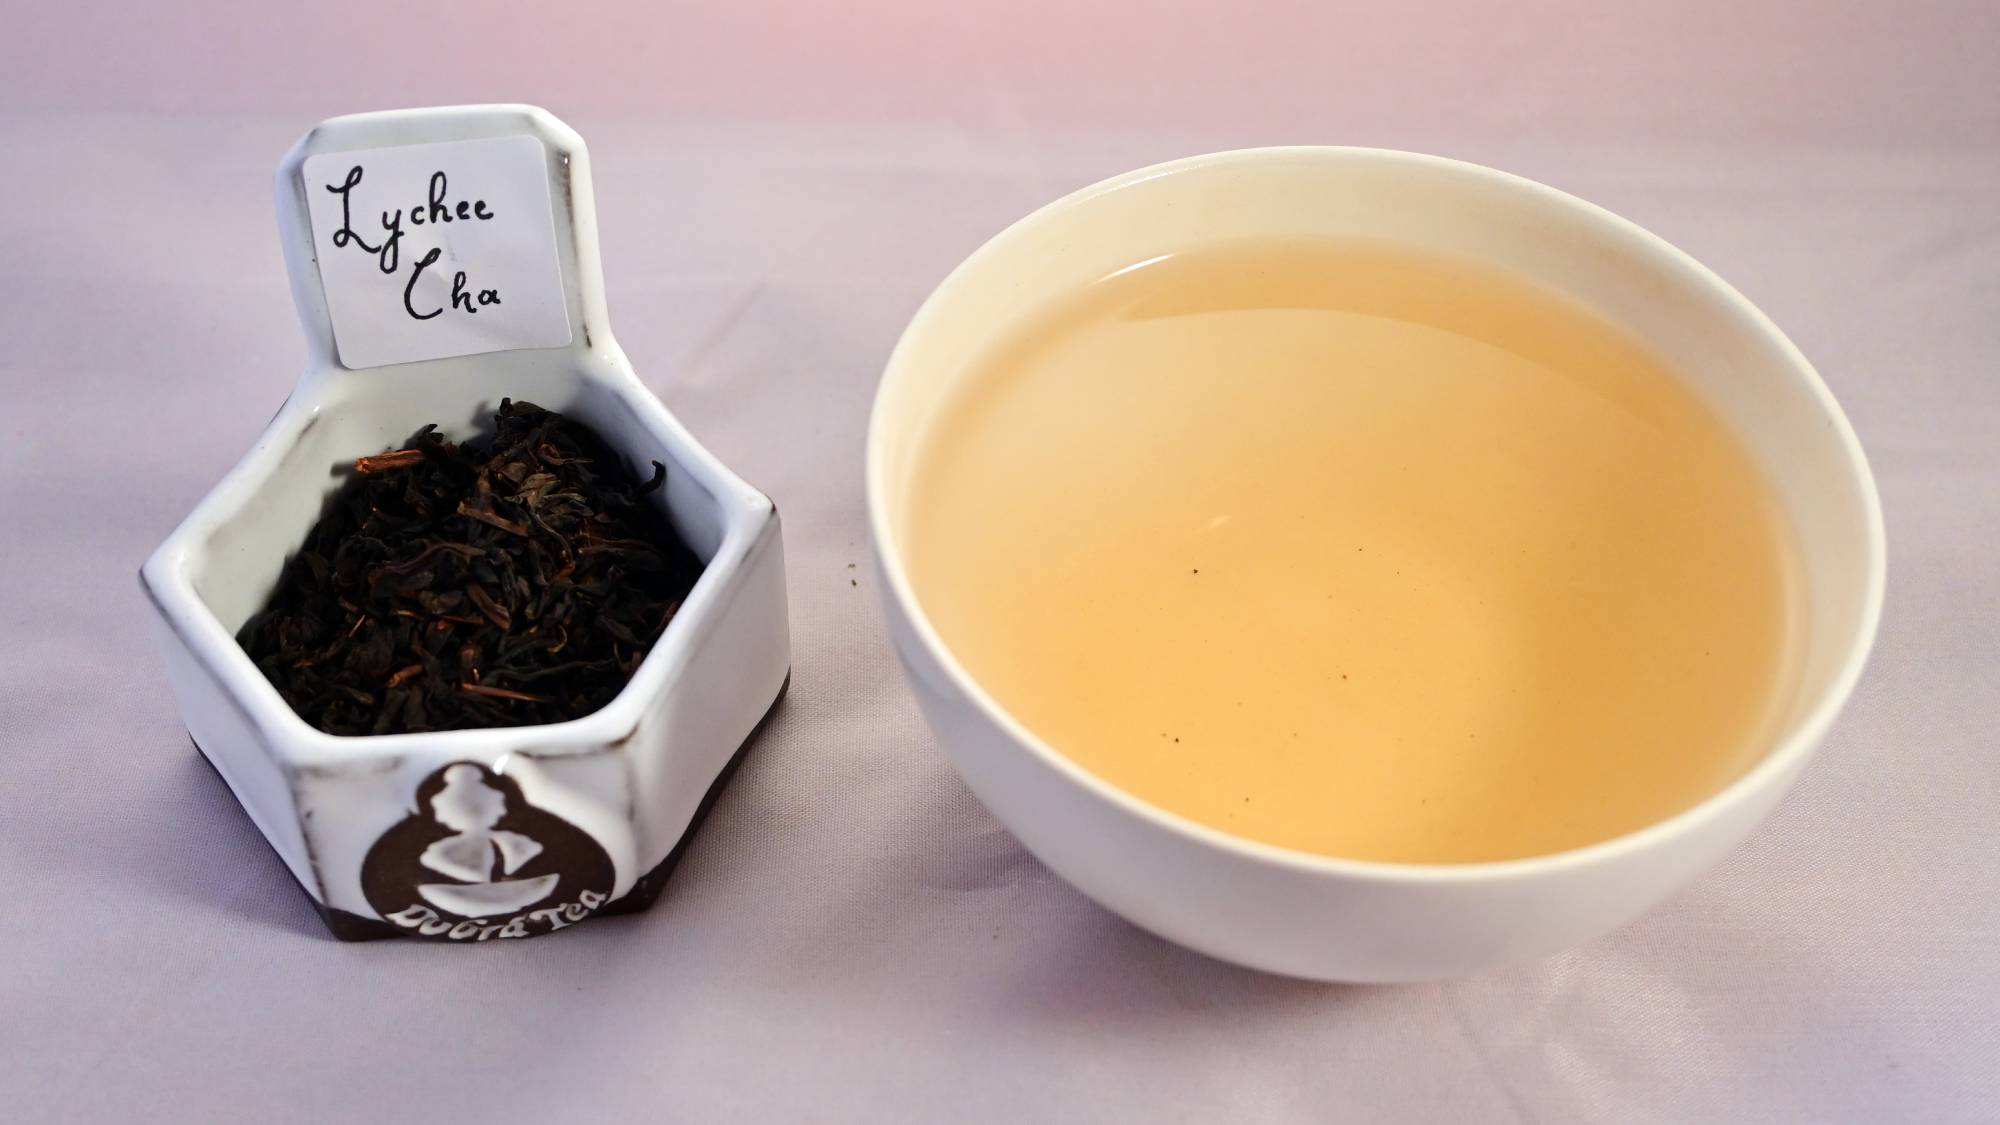 A side by side comparison of Lychee Cha leaves and steeped tea. On the left, the leaves are black and dark brown. On the right, the steeped tea is a vibrant yellow.